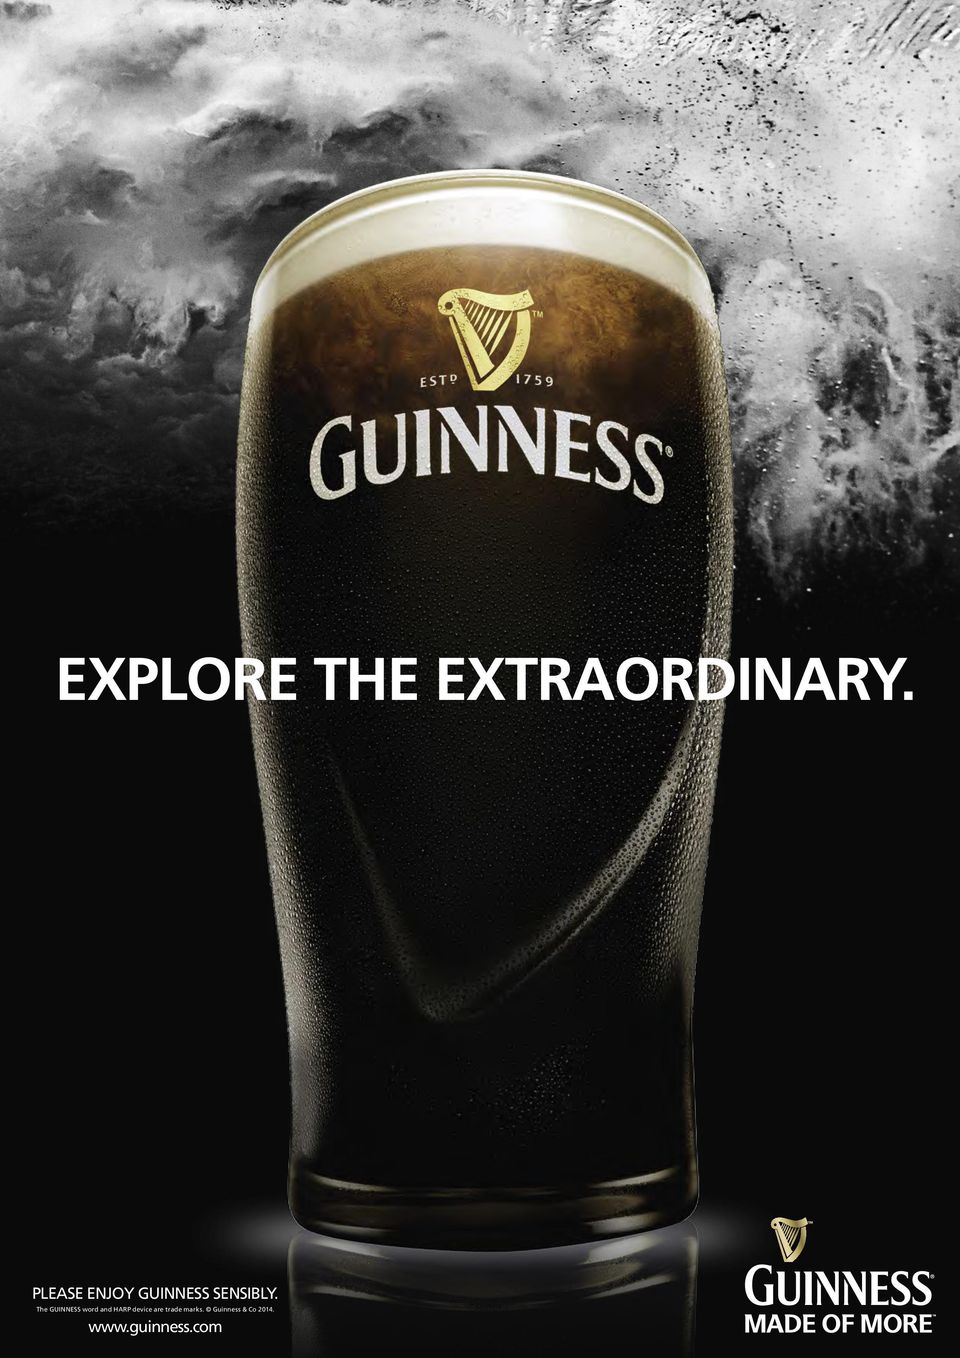 The GUINNESS word and HARP device